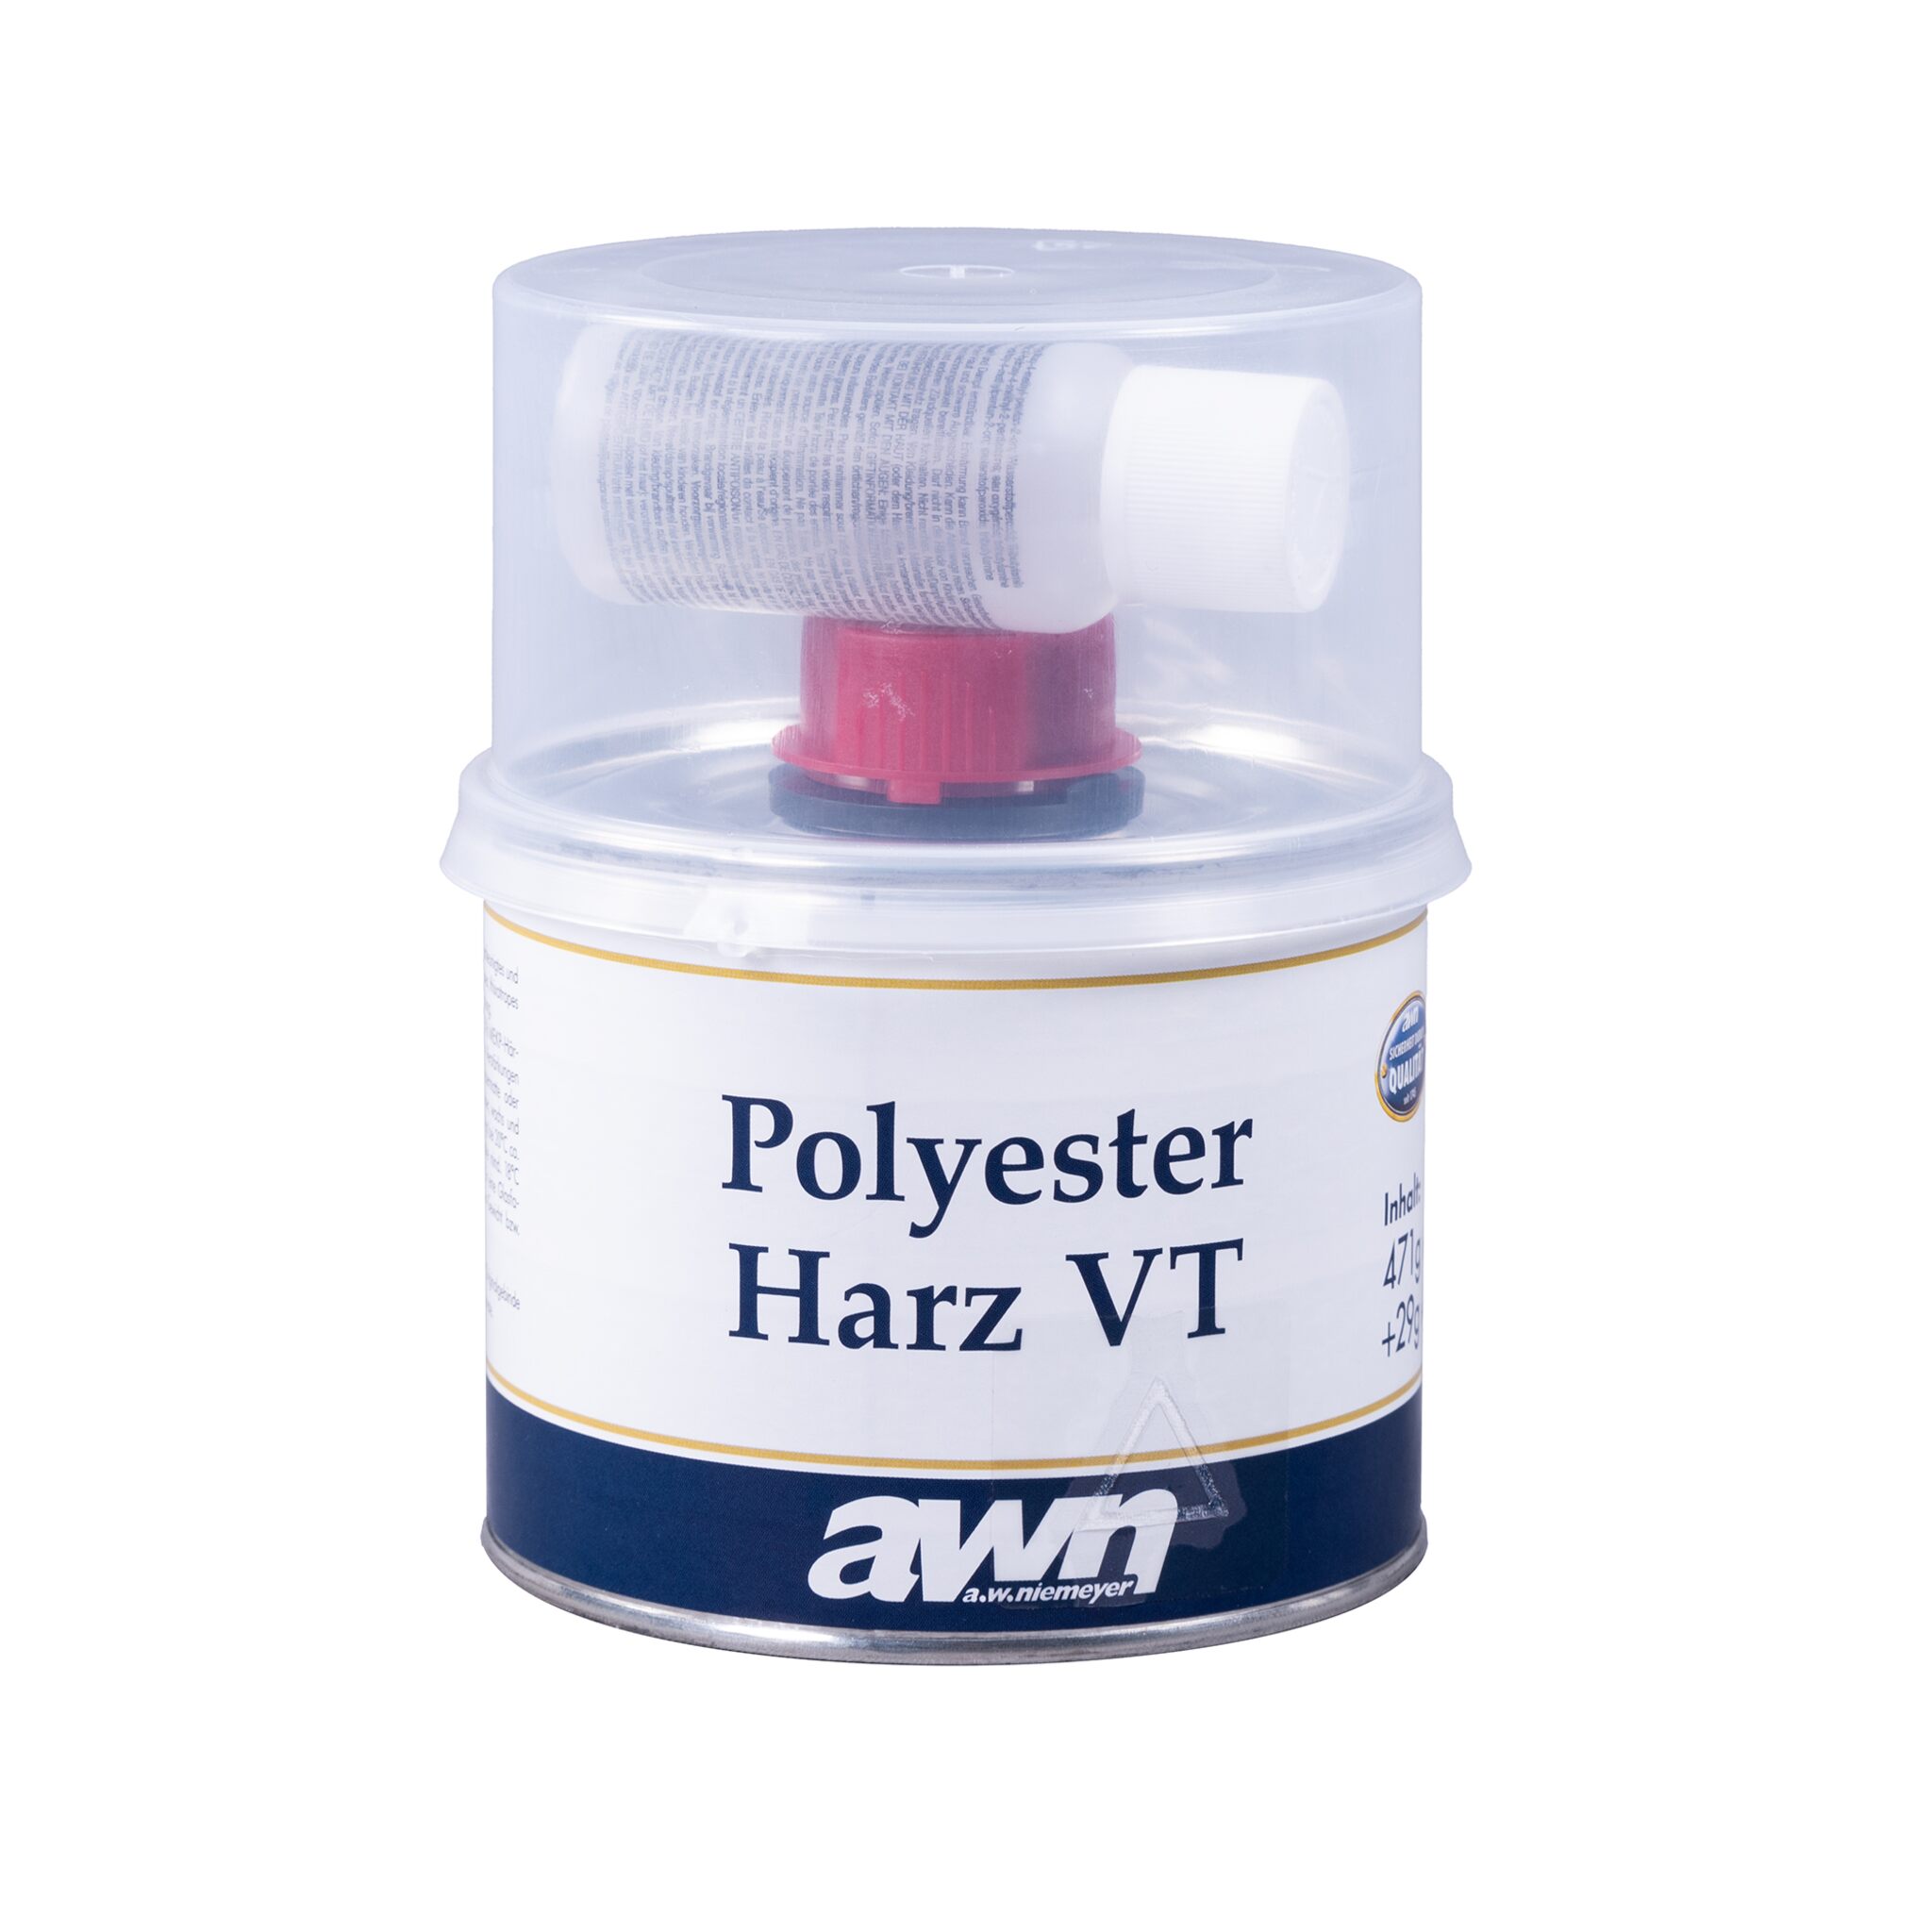 awn Polyester Resin with hardener